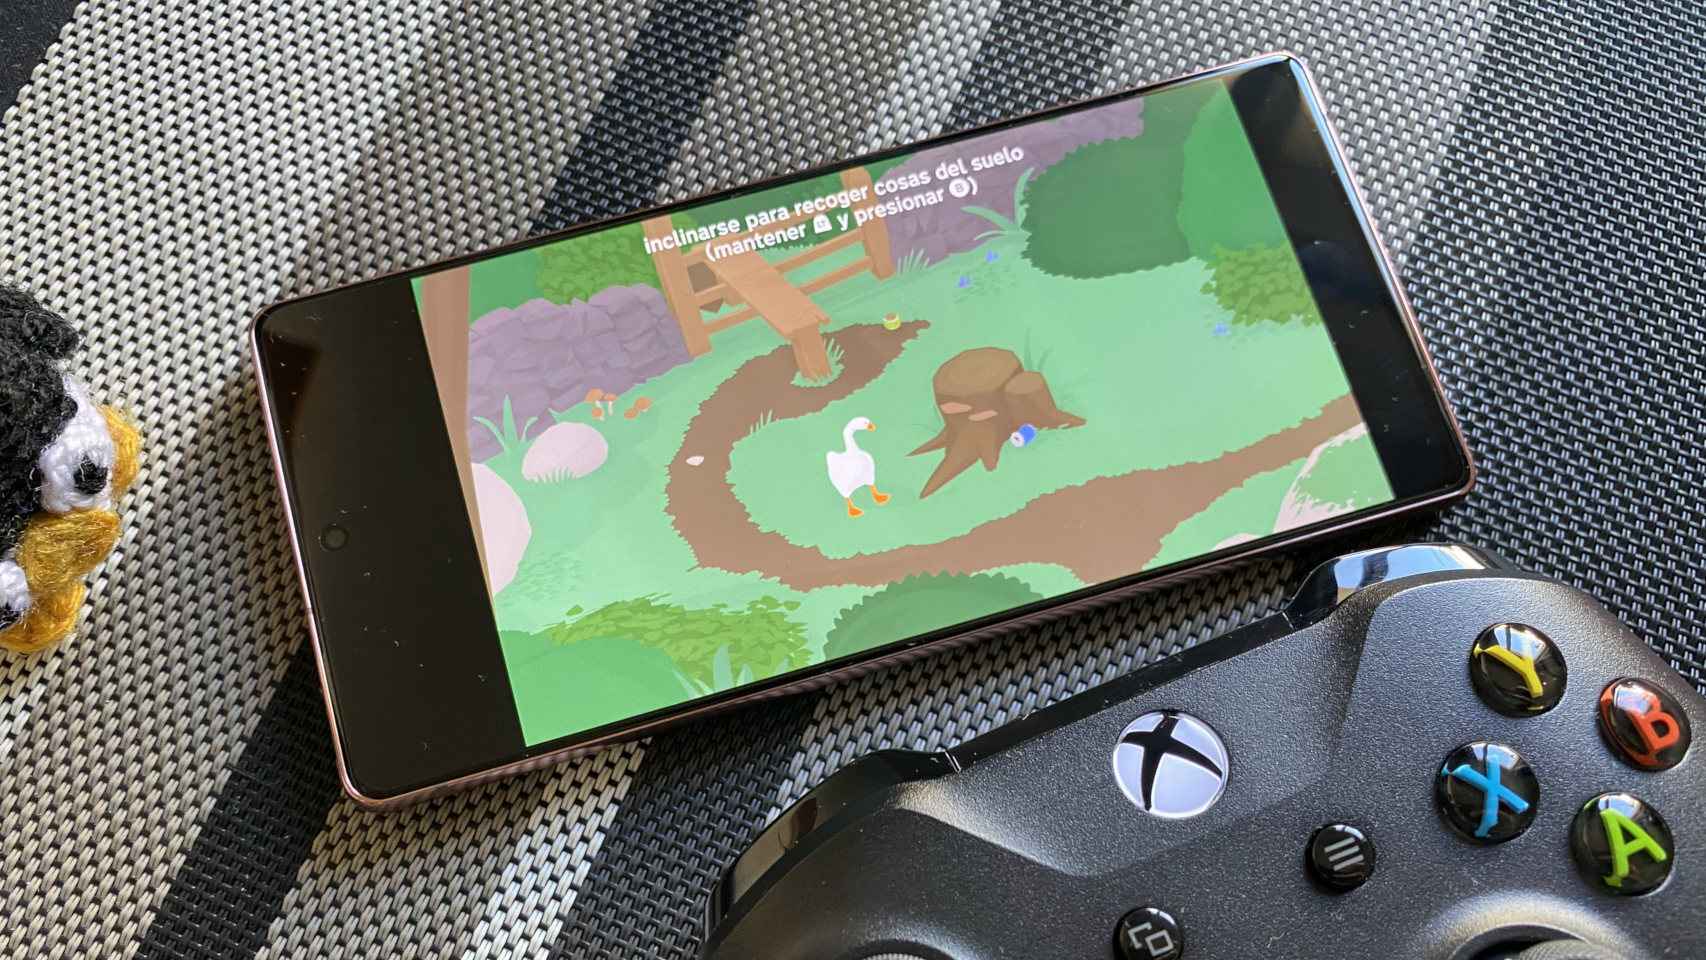 Untitled Goose Game en Xbox Game Pass para Android mediante xCloud